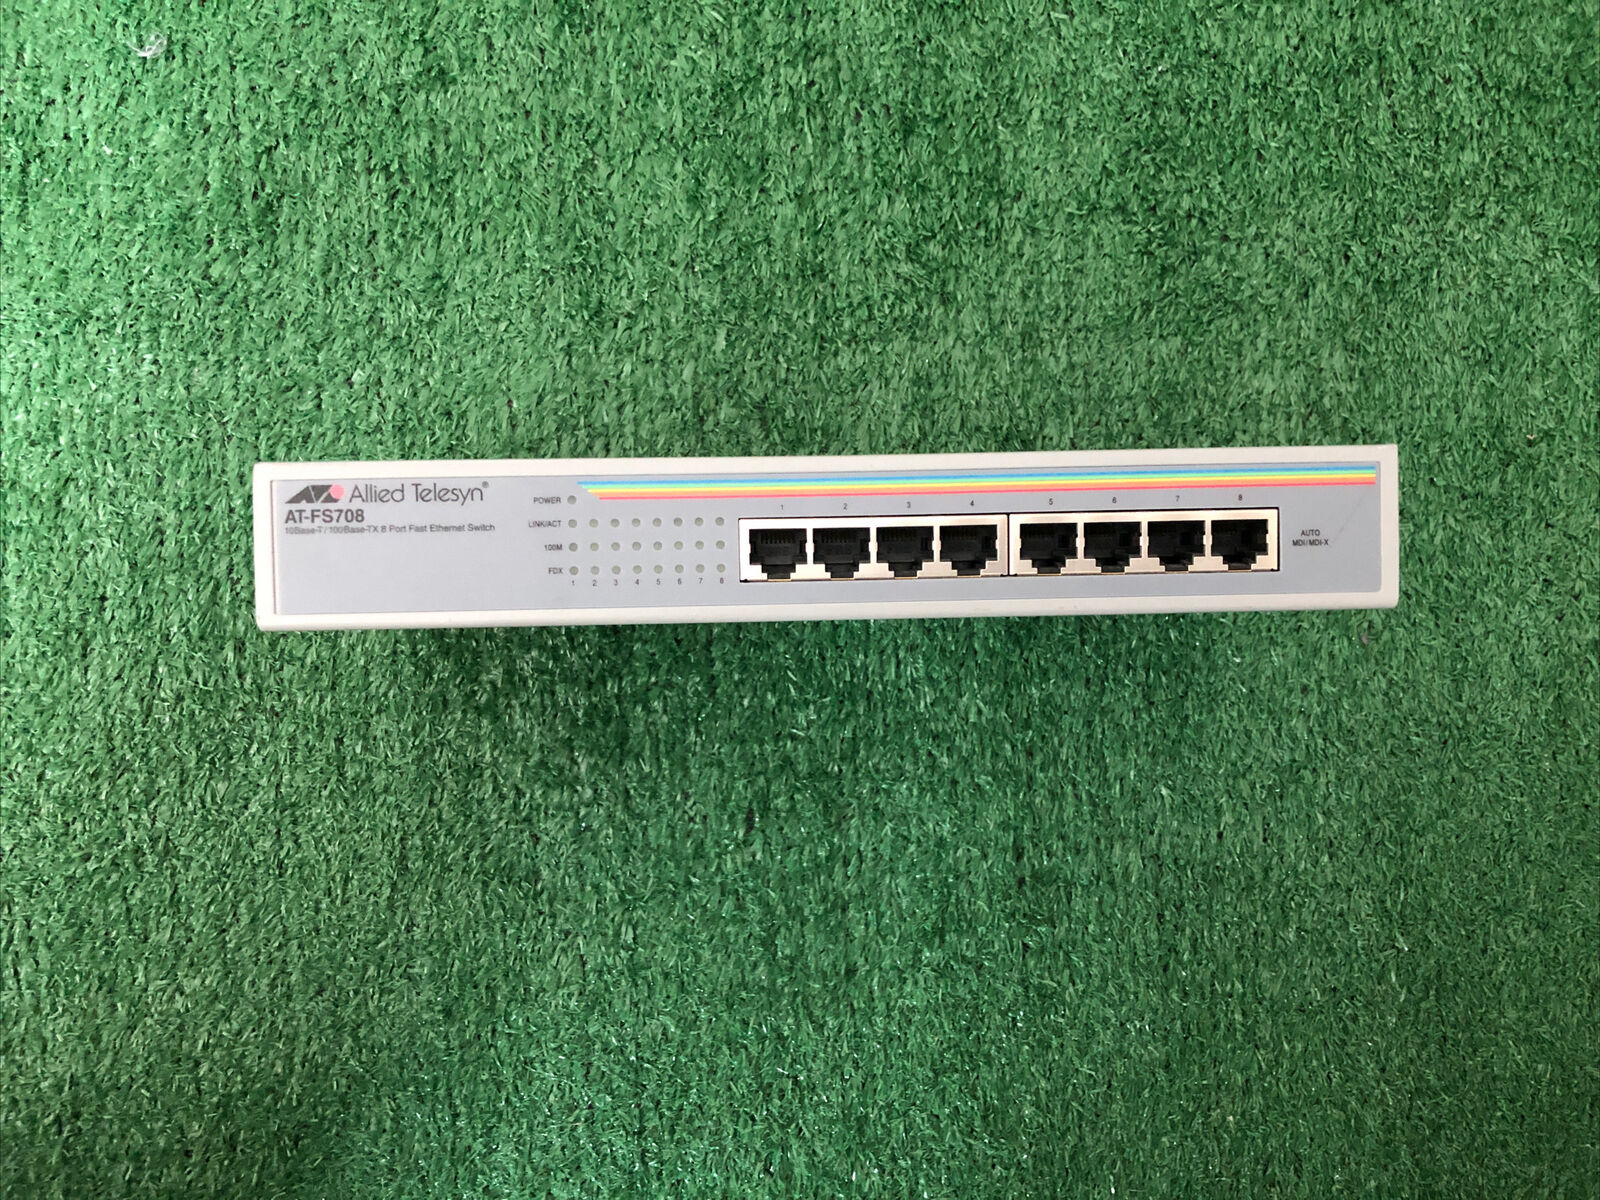 Allied Telesis AT-FS708 Centrecom 8-Port Switch 10/100 Mbps Fast Ethernet Switch